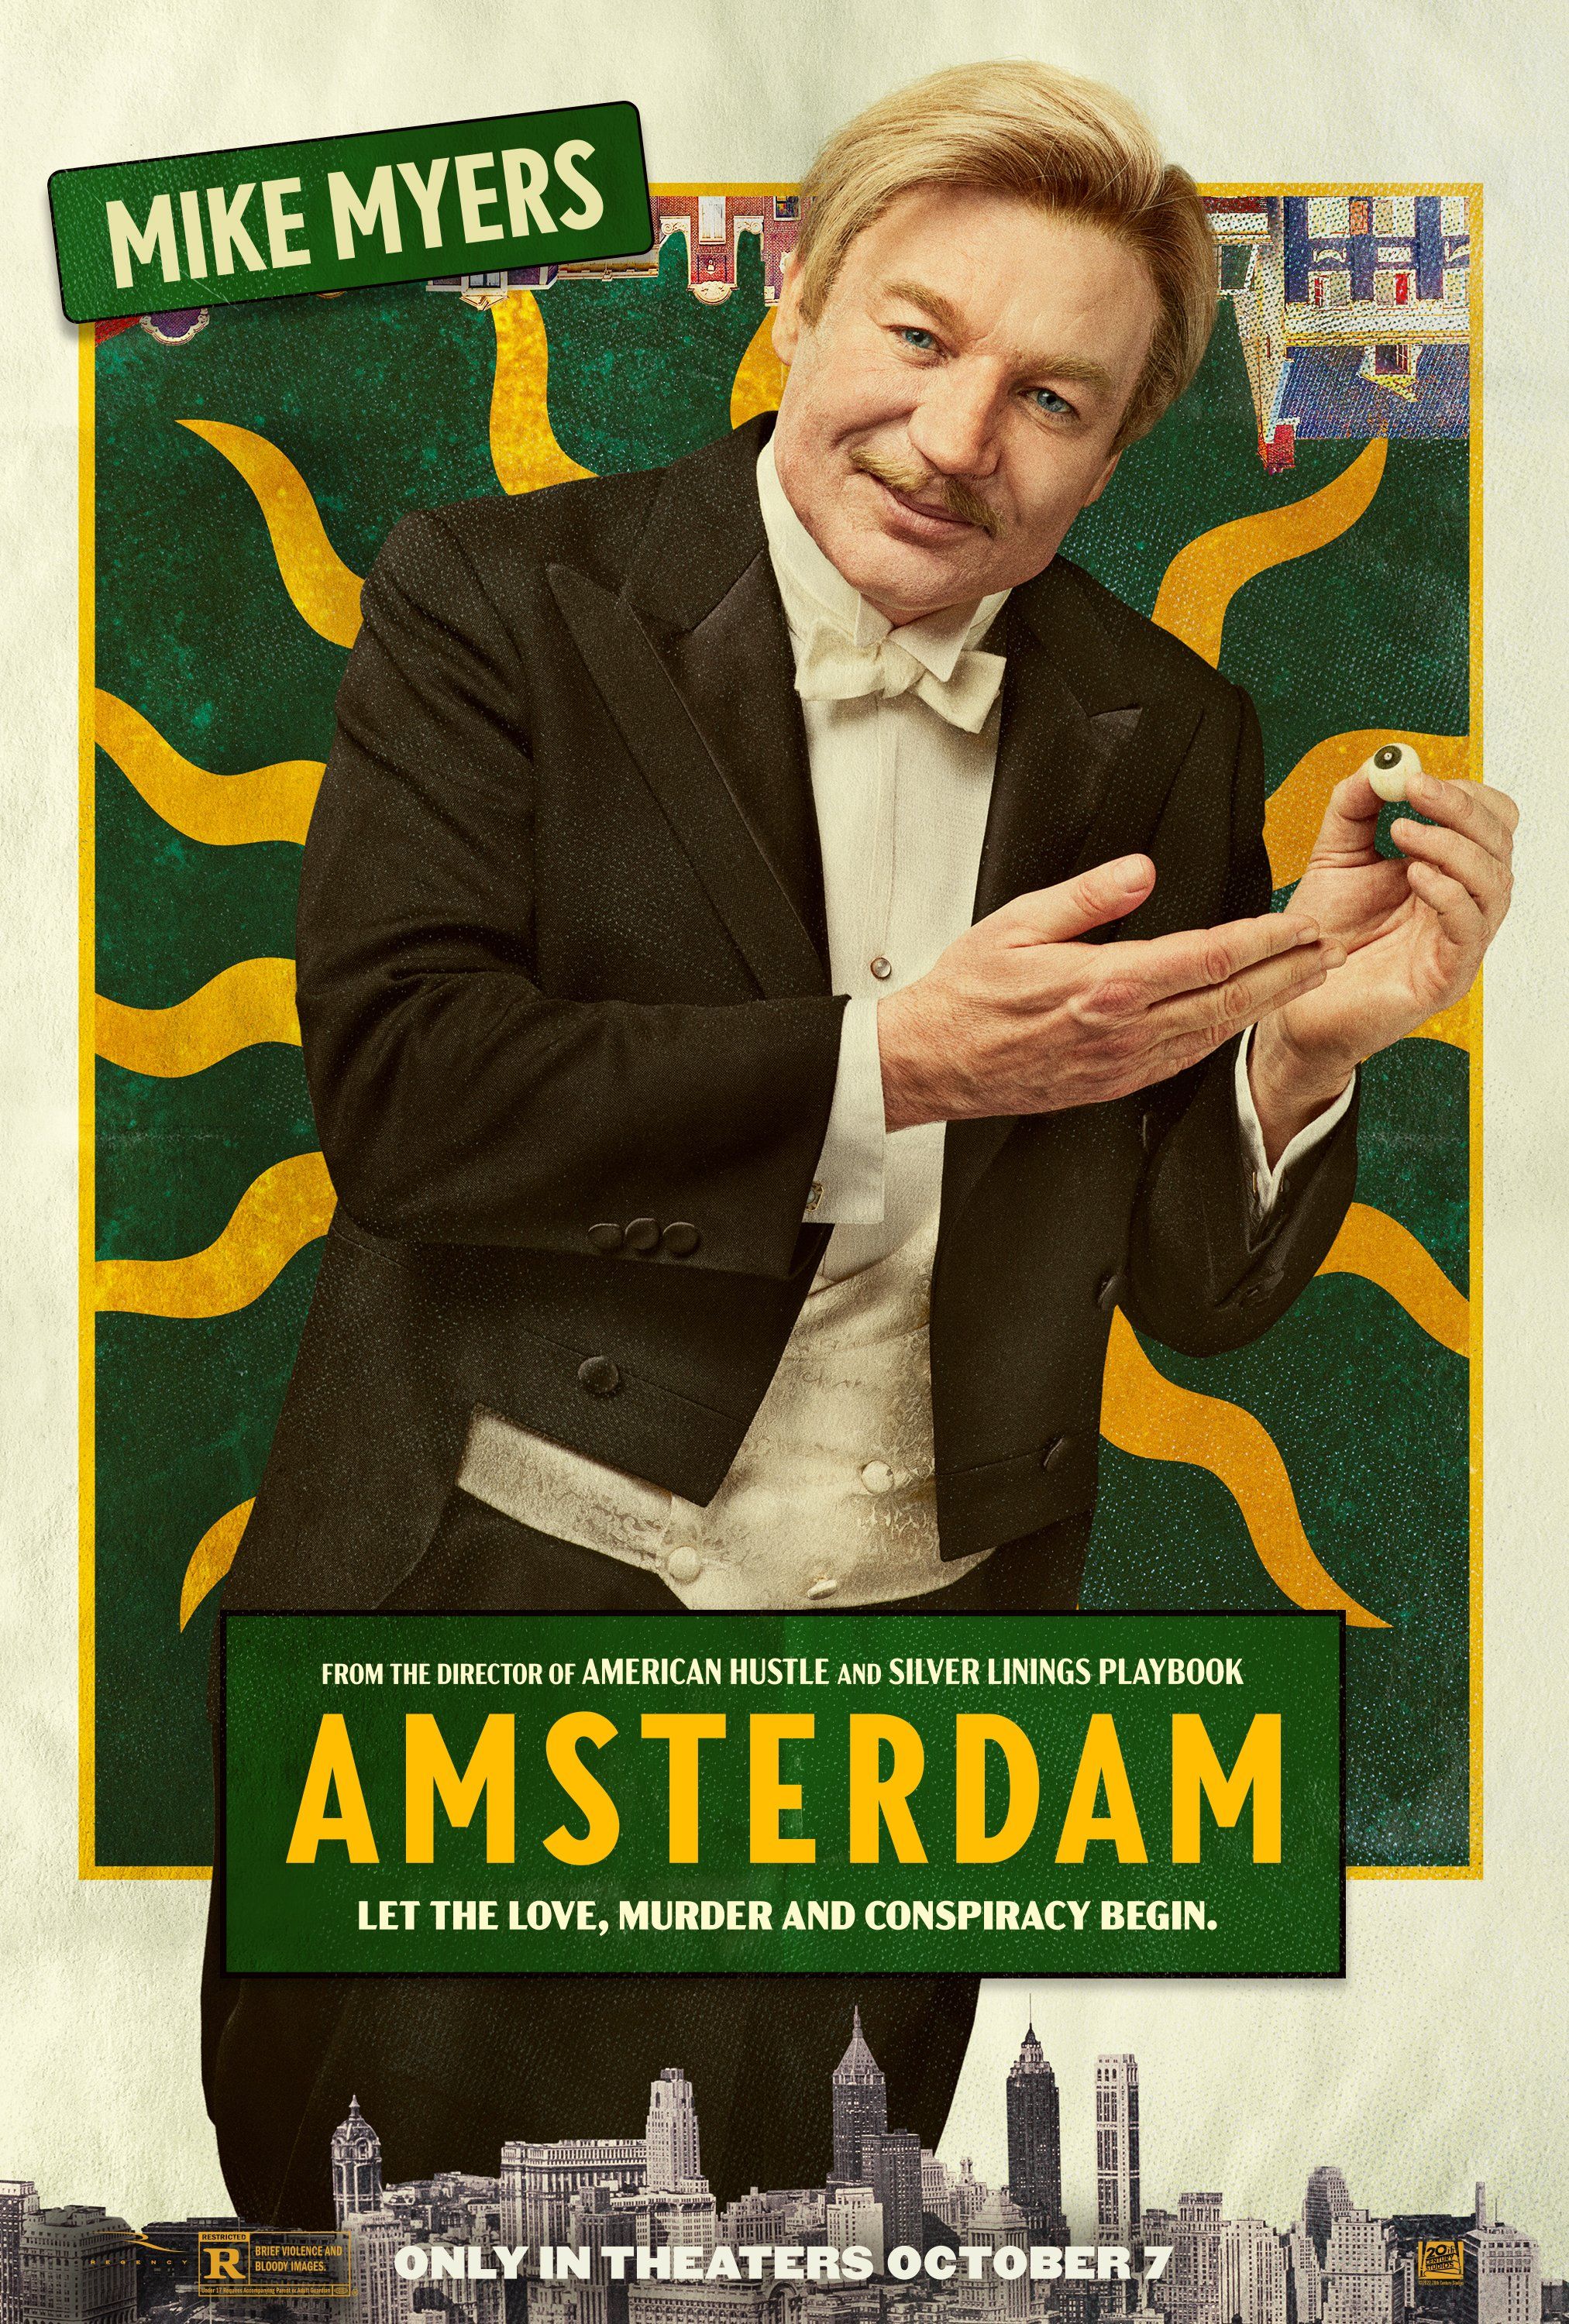 Mike Myers in Amsterdam poster